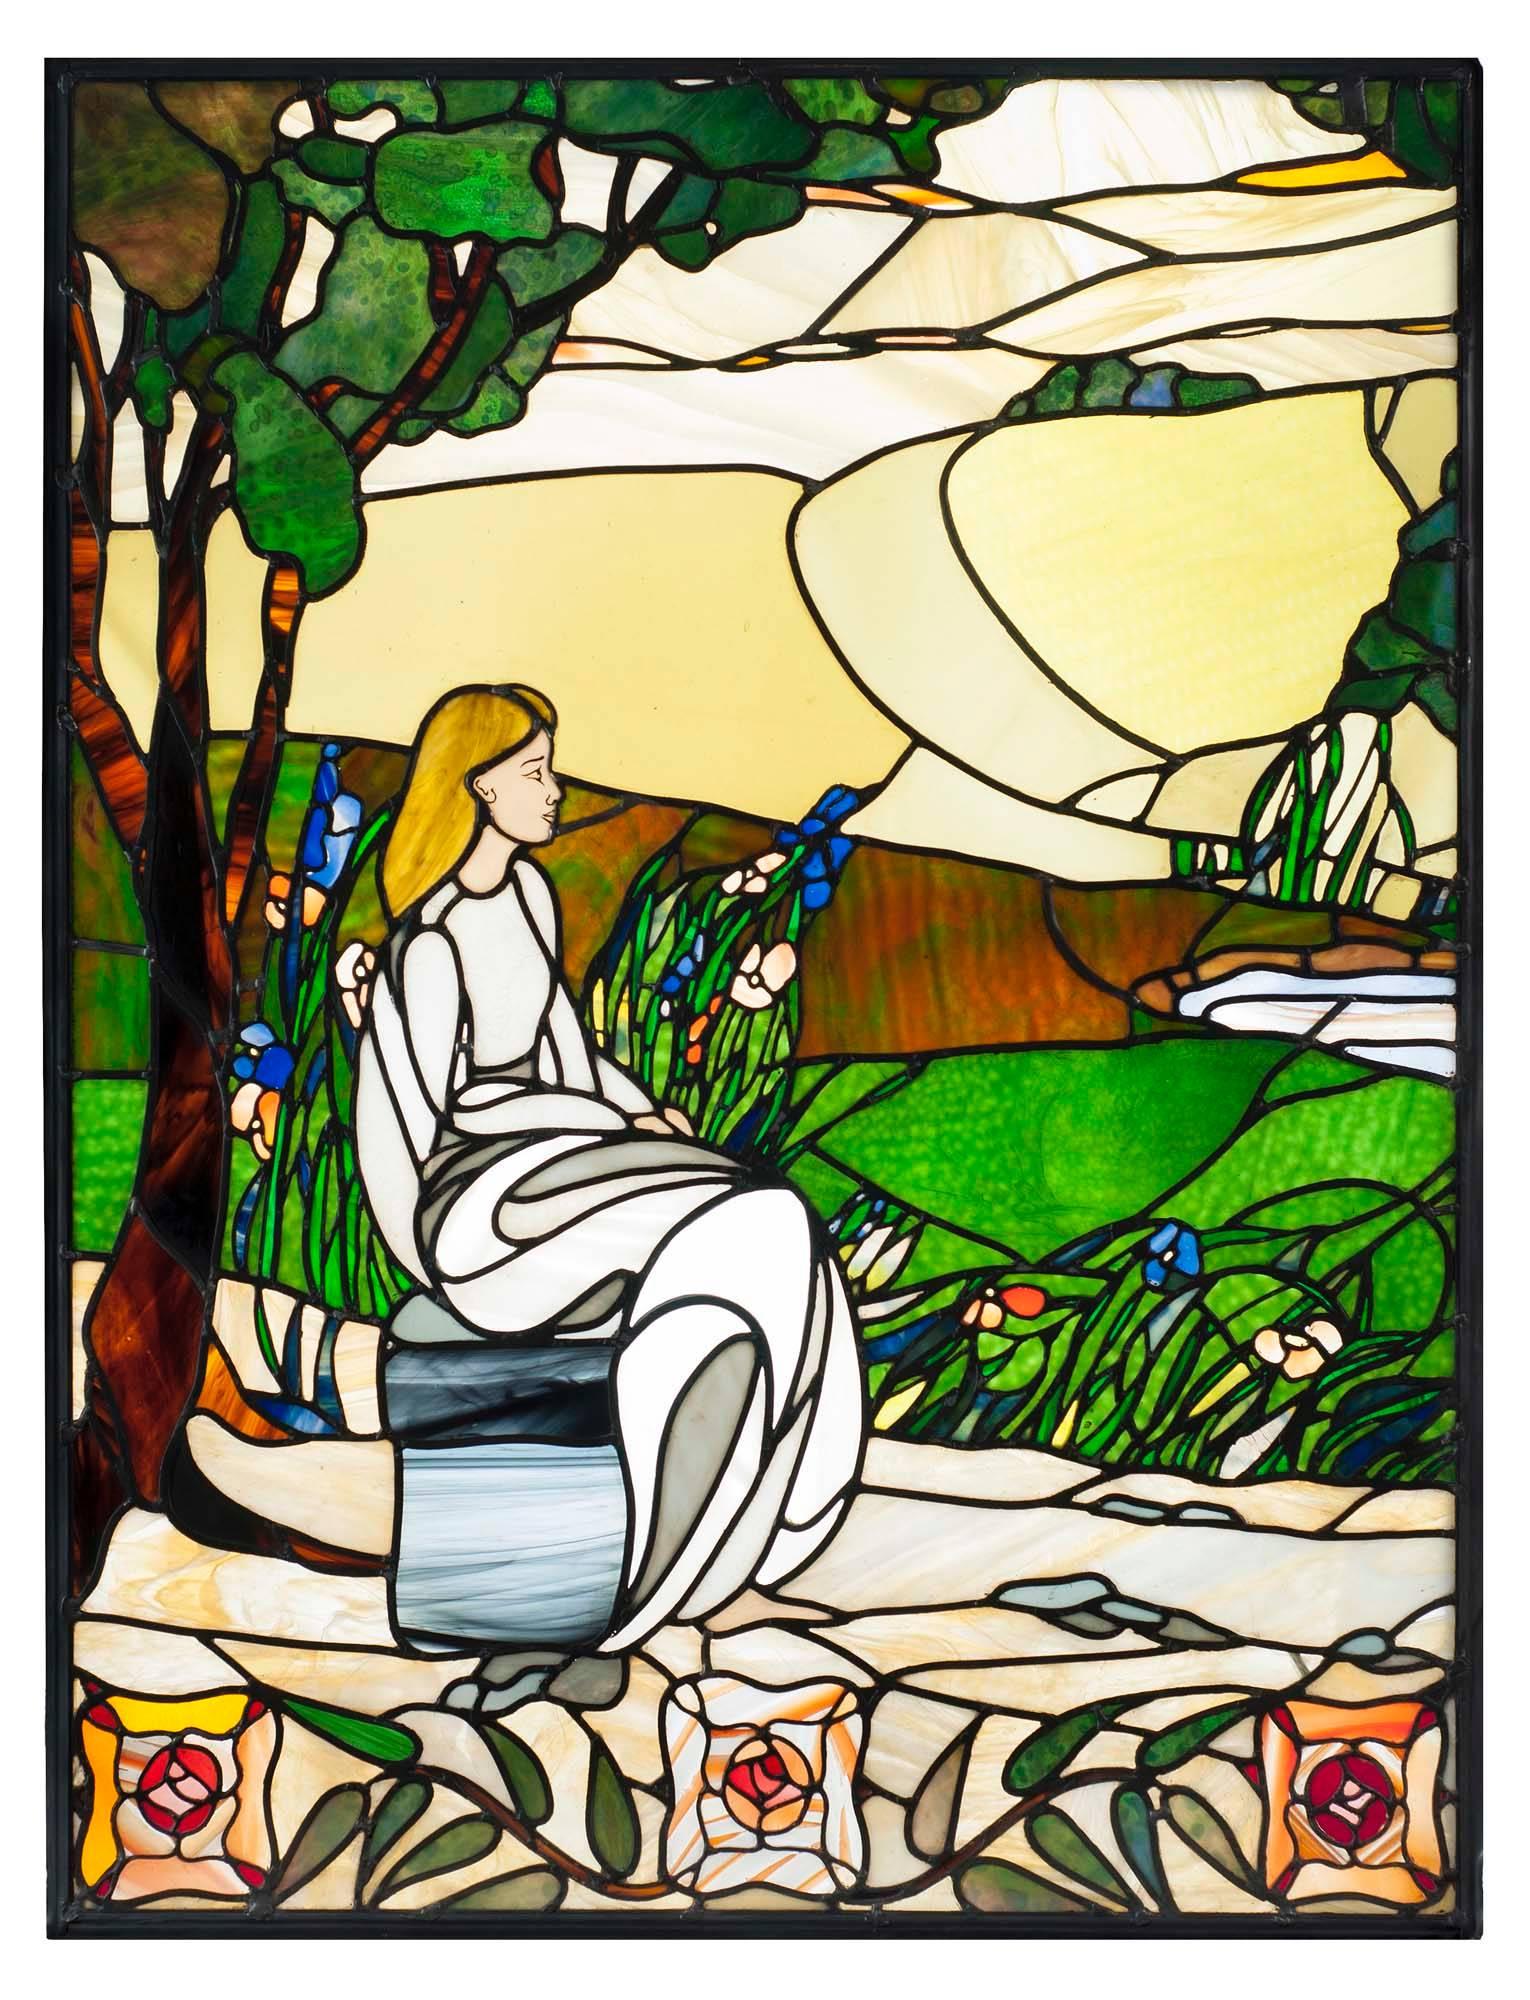 'Gather Ye the Rosebuds'
A 20th century Art Nouveau style stained glass tryptich of maidens in a woodland setting. The enameled logo at the back of one of the panels states 'Glashaus 88', they were a Glasgow company of stained glass makers and